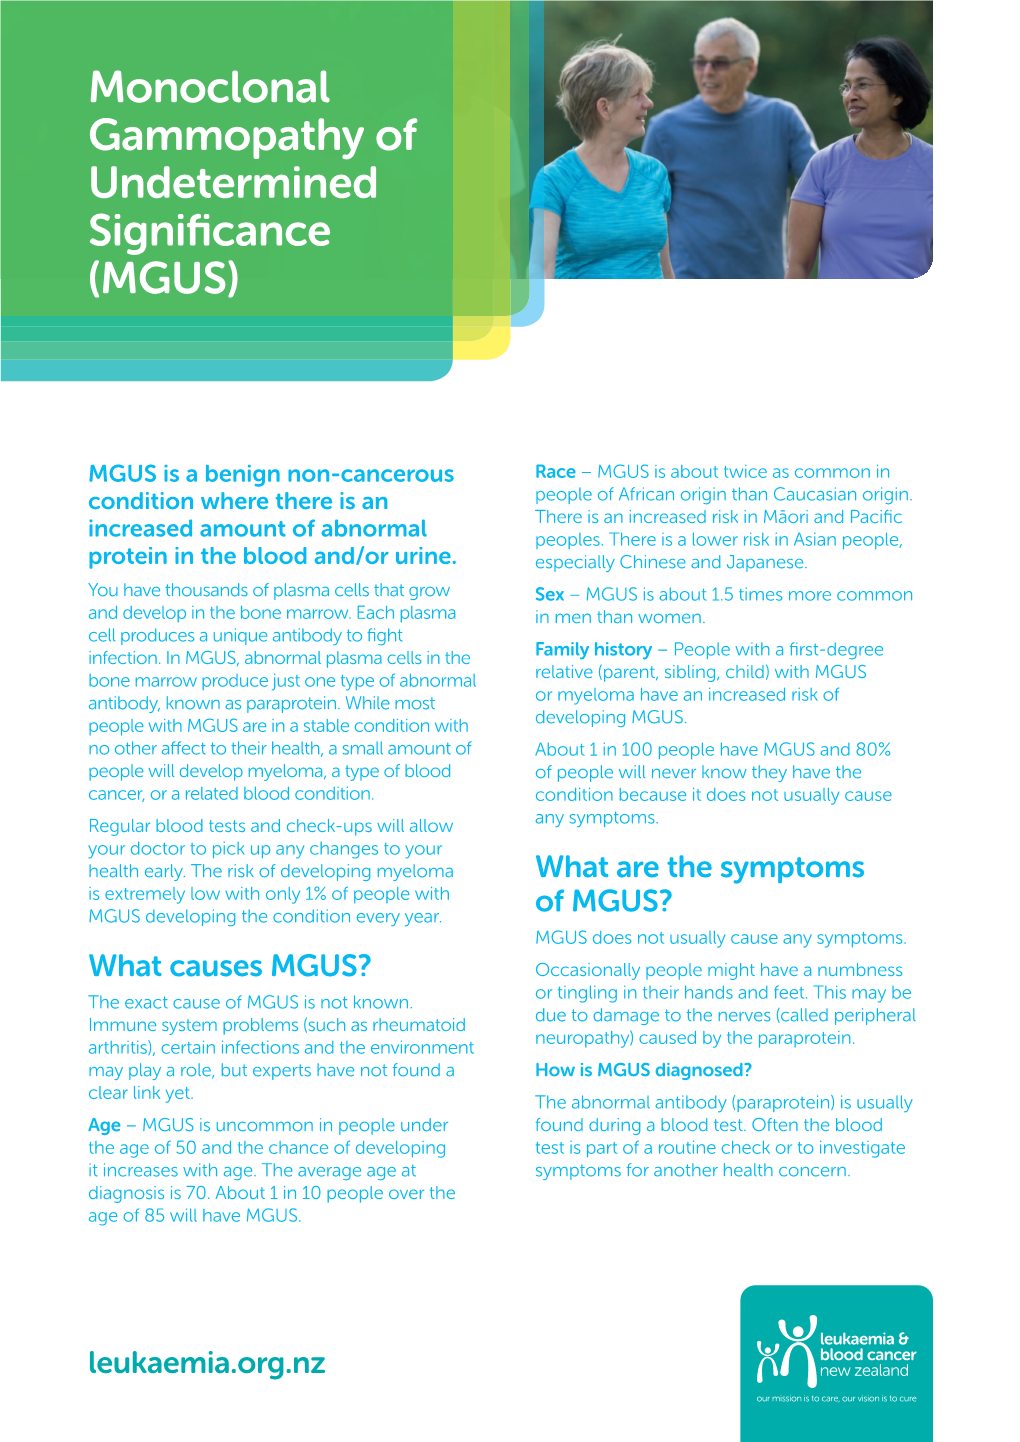 Monoclonal Gammopathy of Undetermined Significance (MGUS)